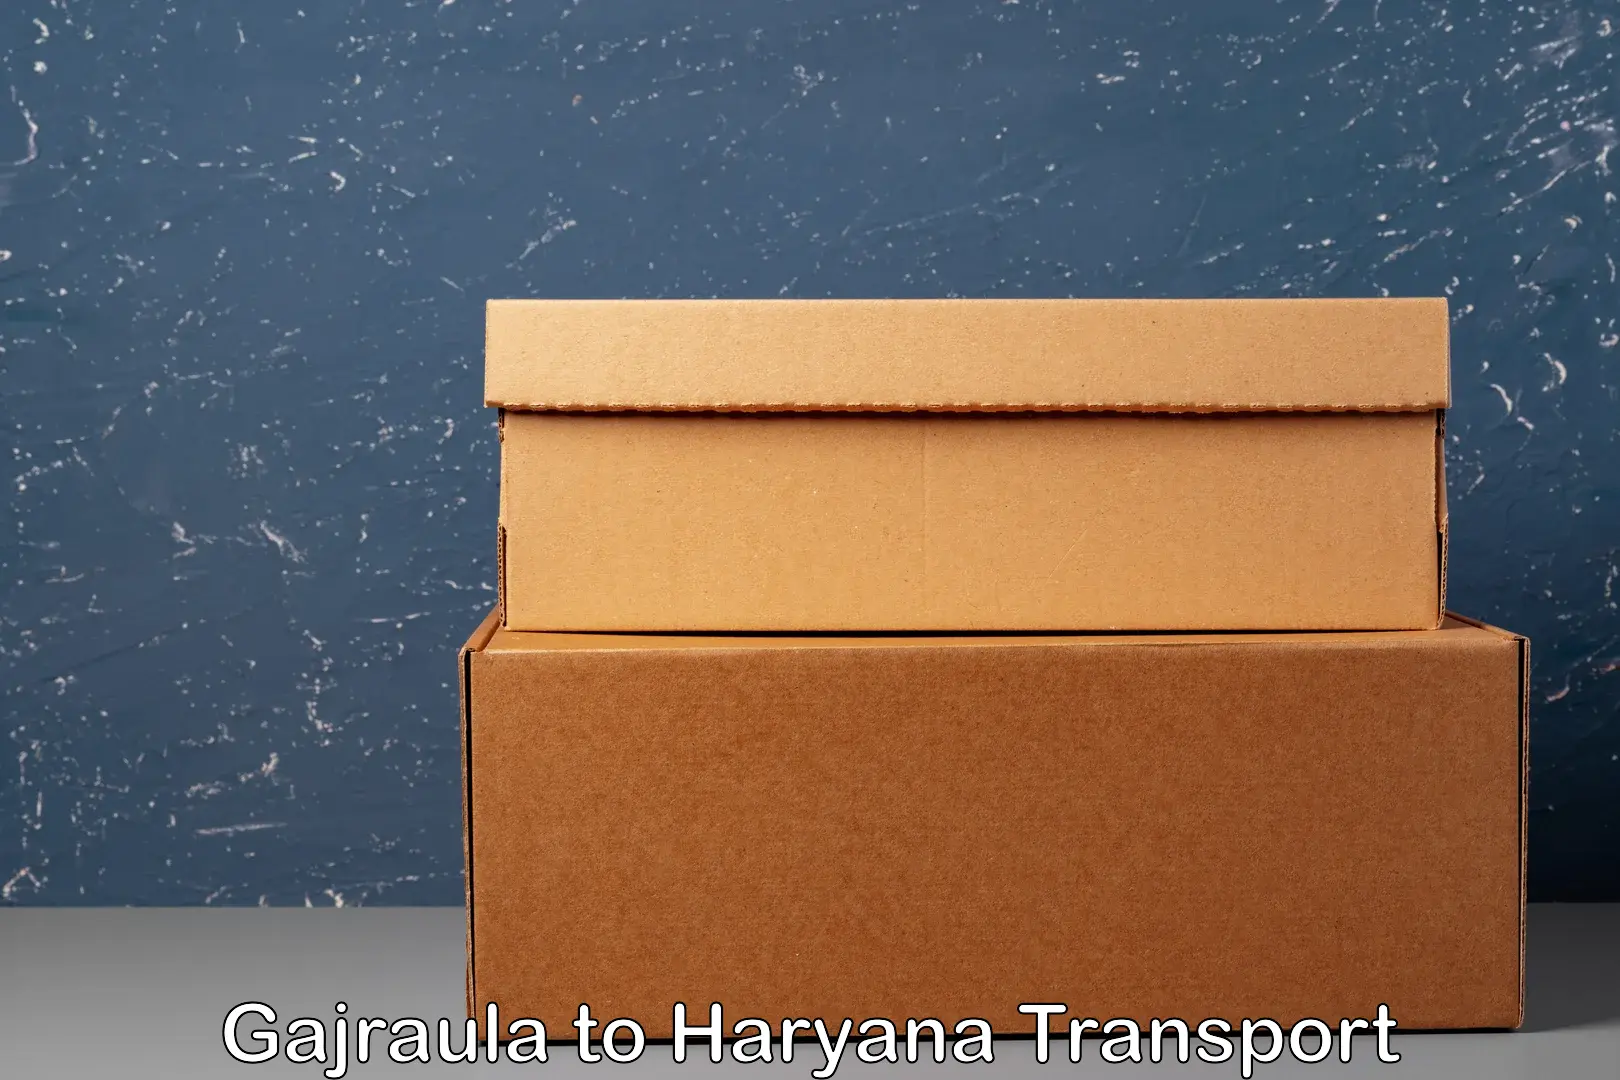 Delivery service Gajraula to Panipat